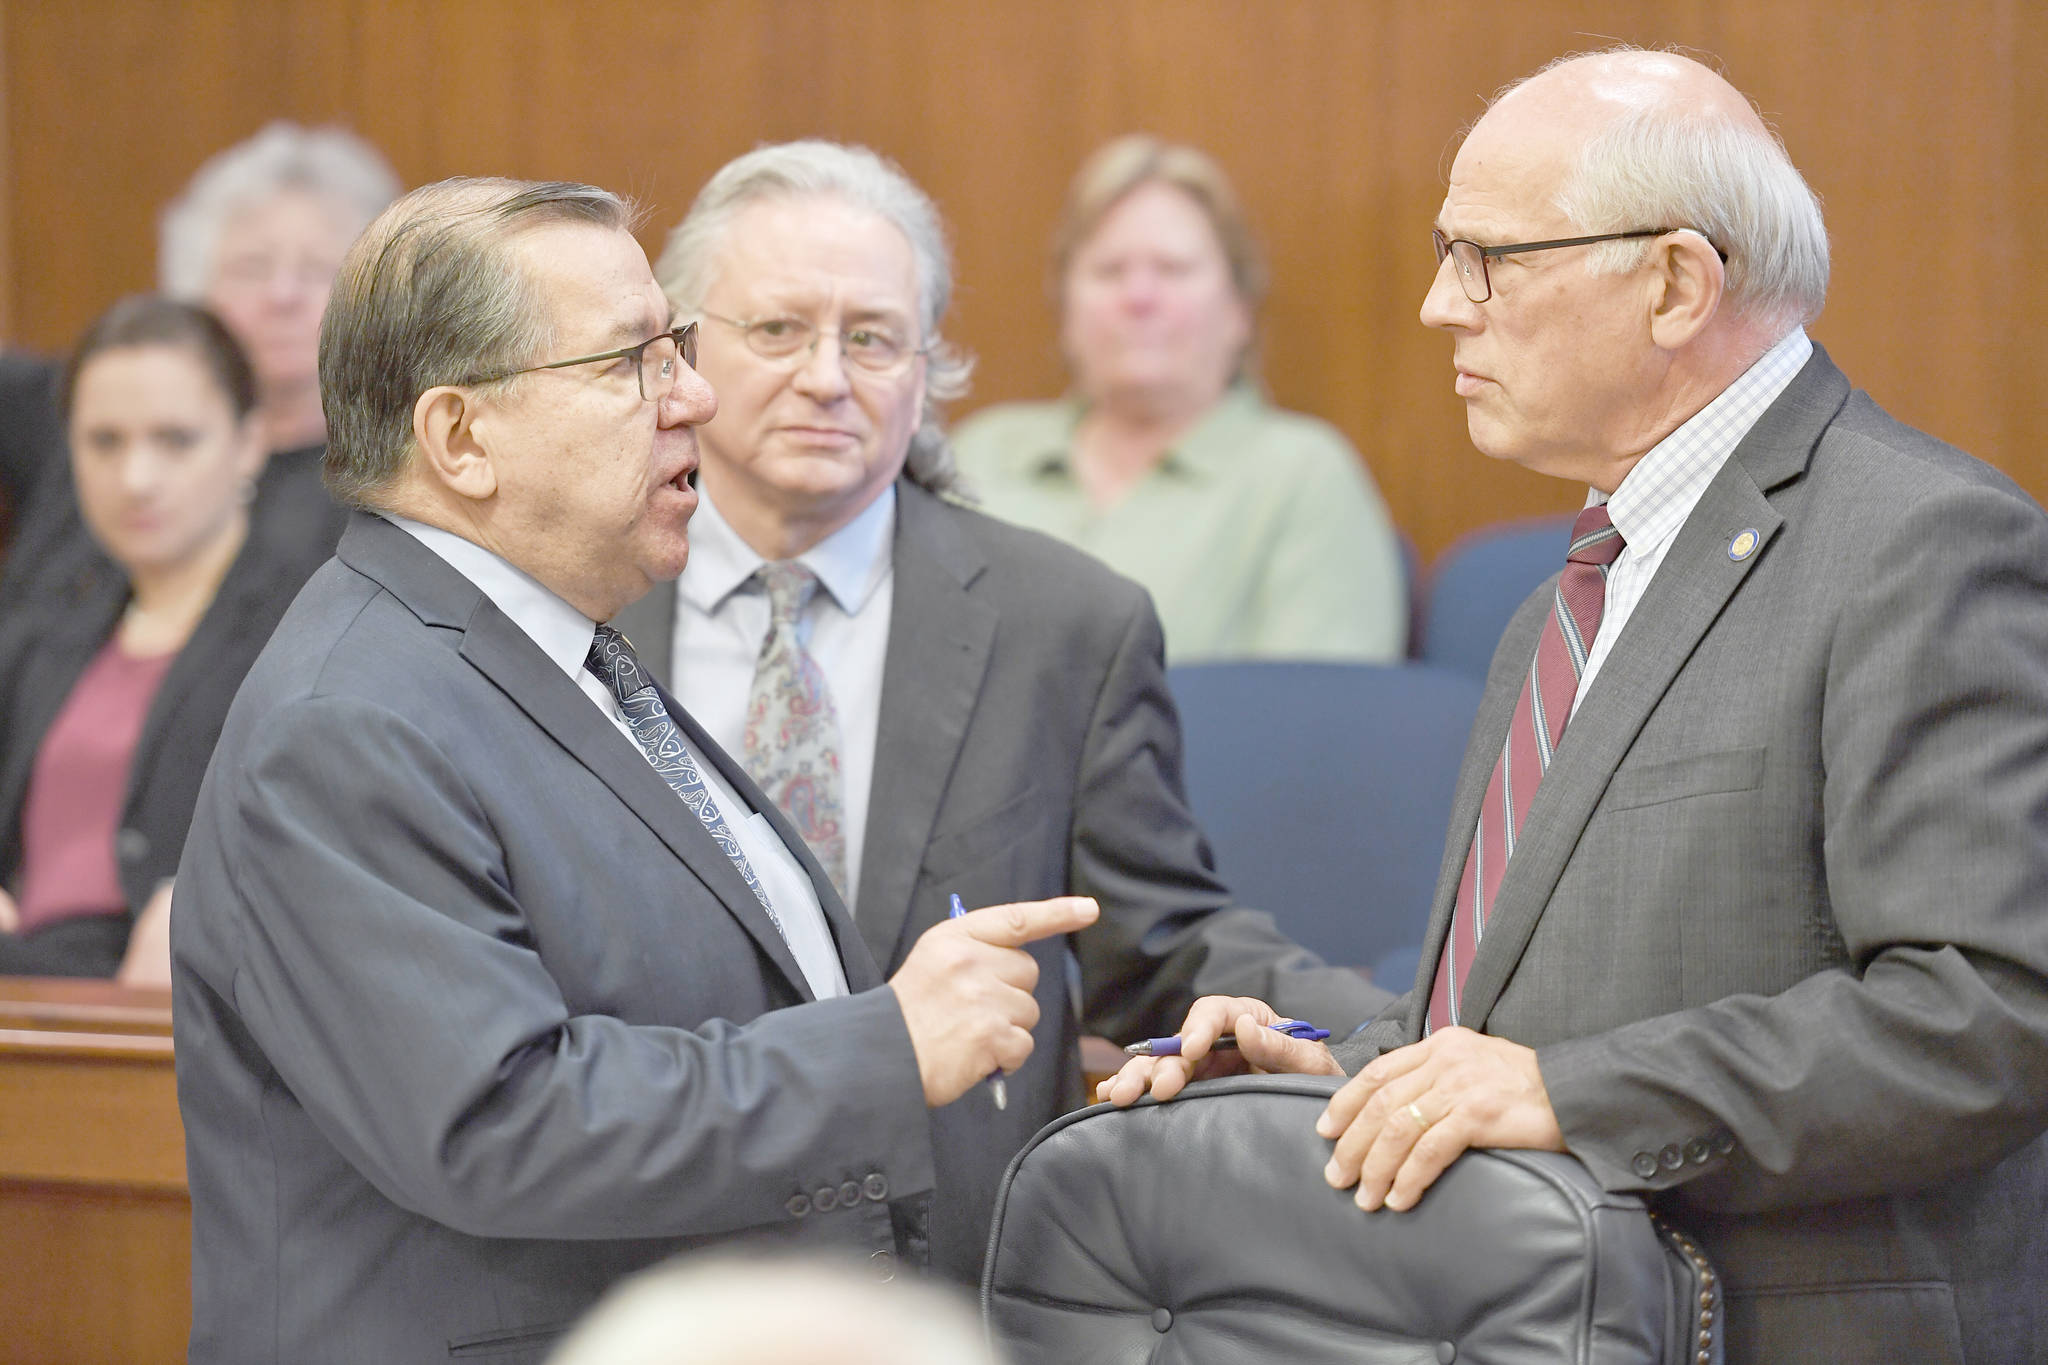 Sen. Lyman Hoffman, D-Bethel, left, expresses his displeasure with Sen. John Coghill, R-North Pole, right, as Sen. Tom Begich listens, during debate on the capital budget in the Senate at the Capitol on Thursday. (Michael Penn/Juneau Empire)